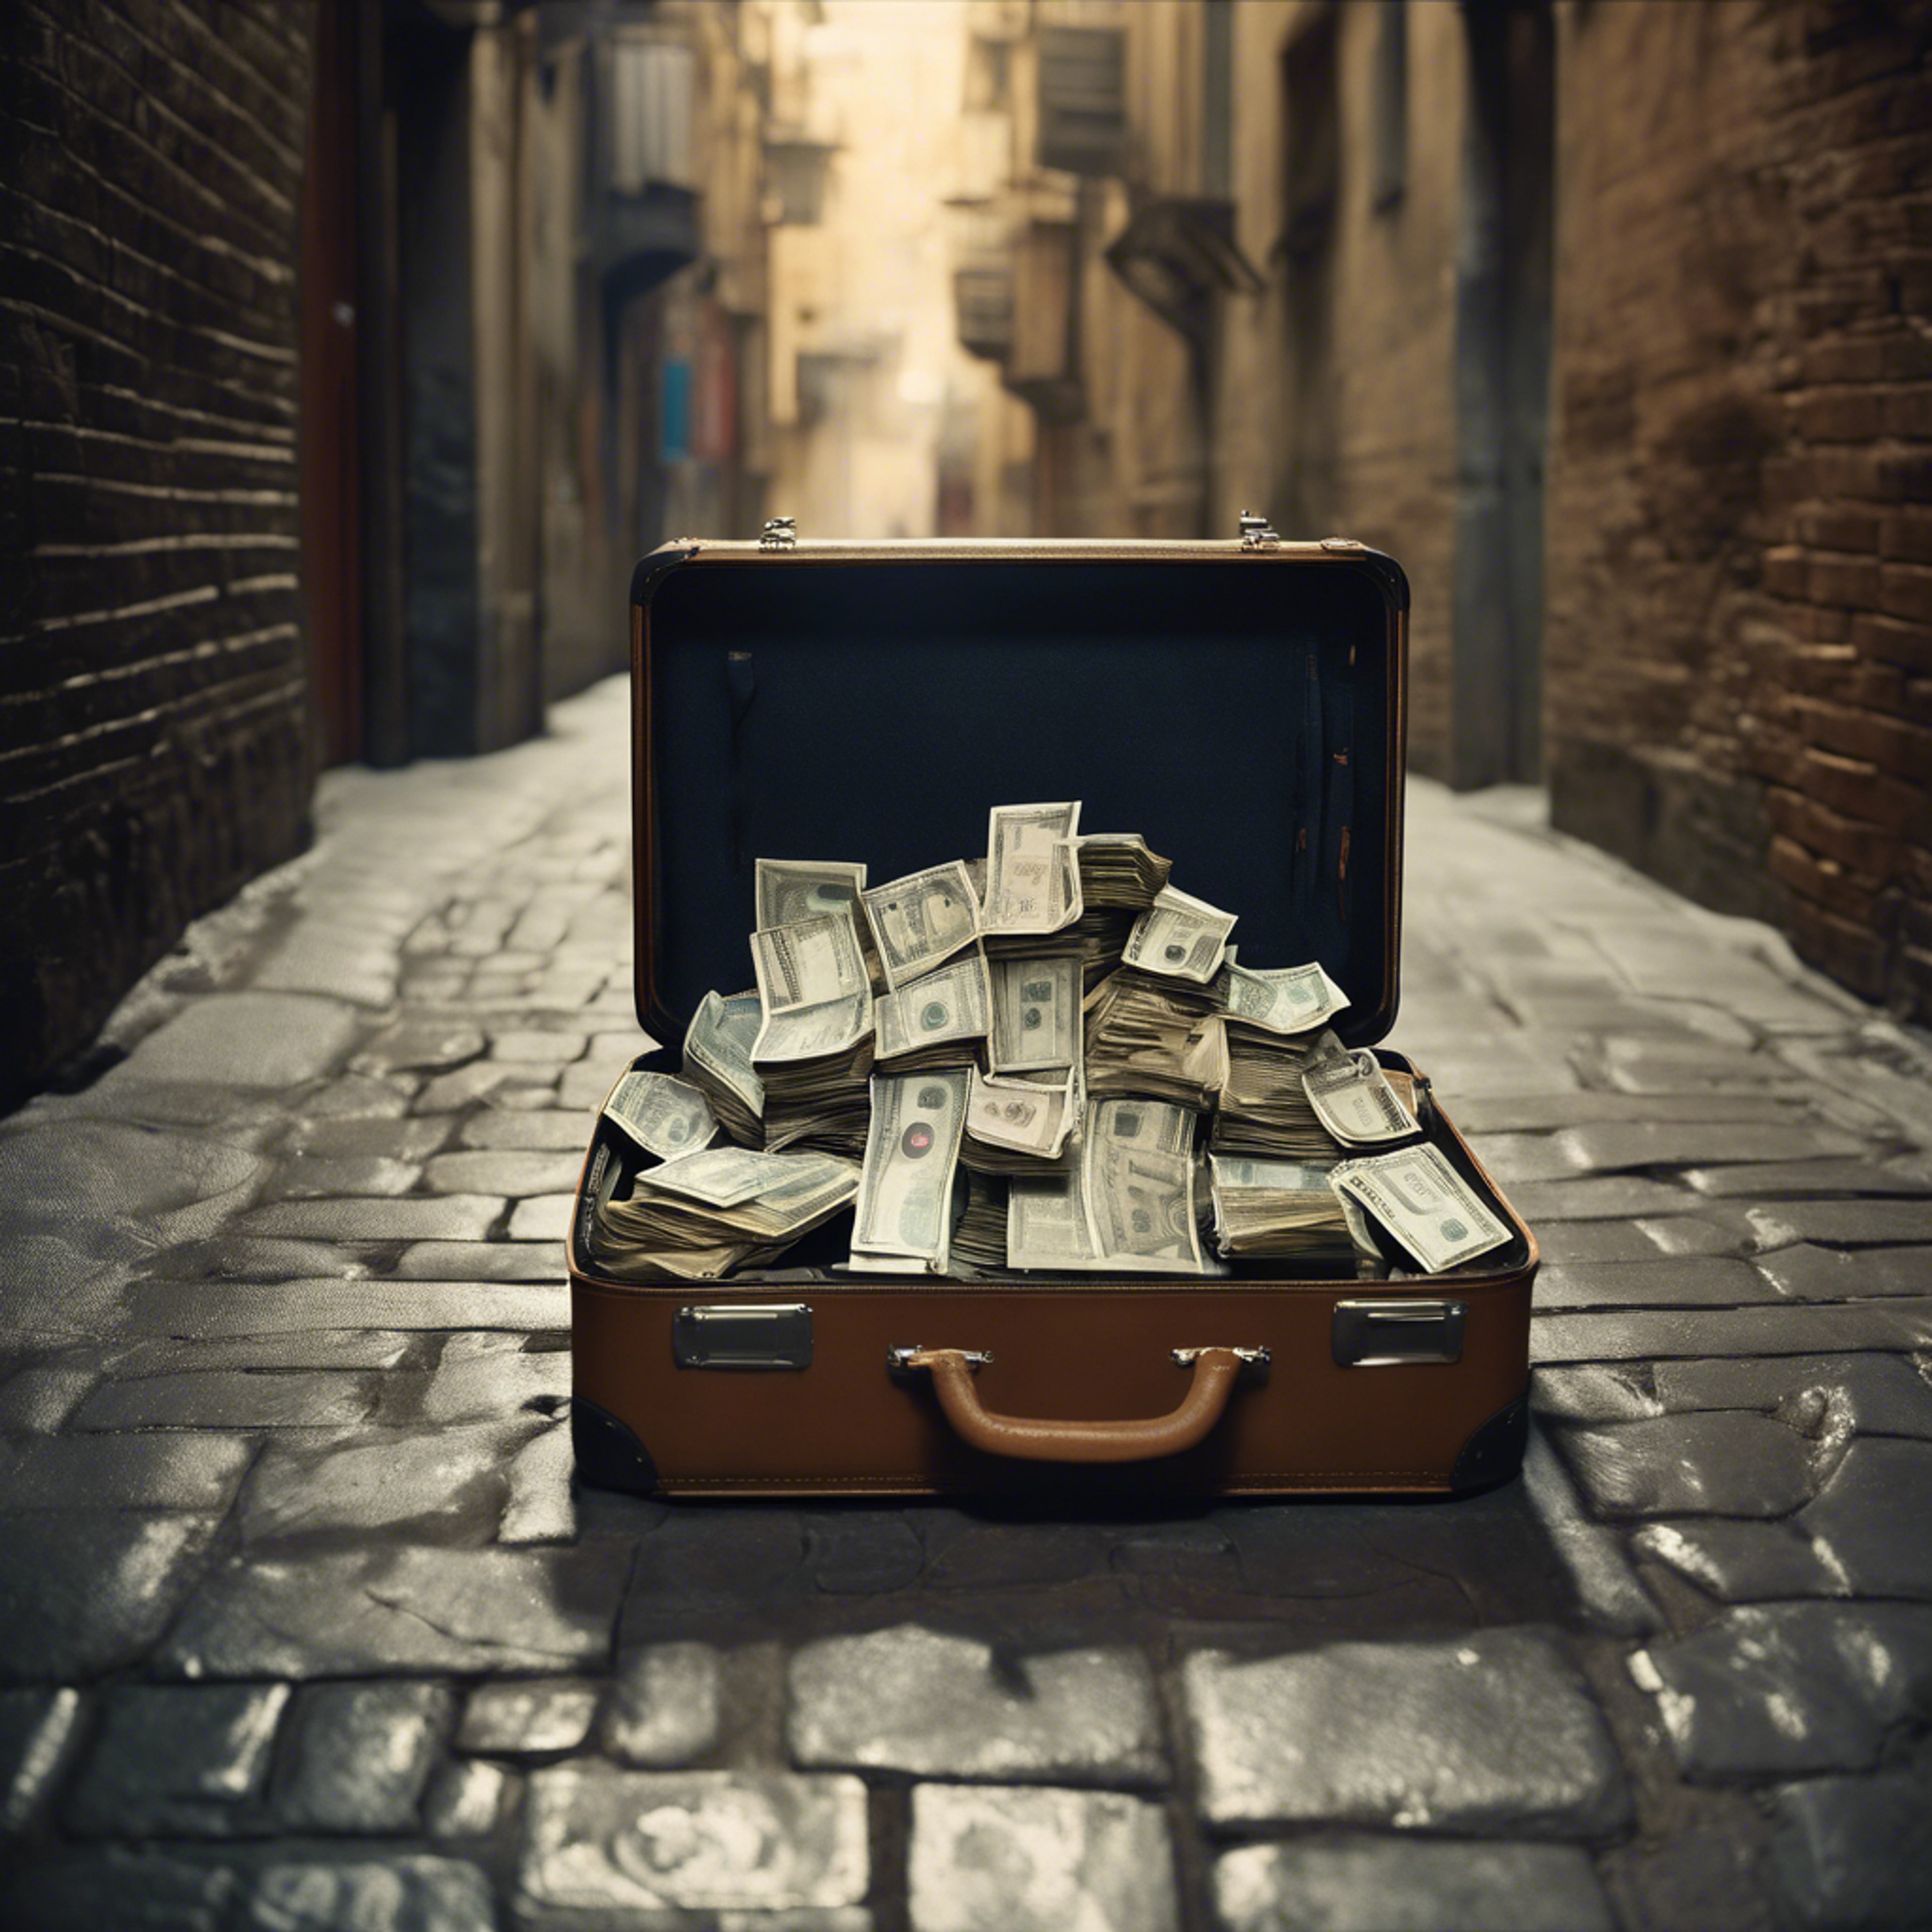 A suitcase filled with mafia money being exchanged in dimly lit alleyway. 牆紙[001aead7b2c840f5bbce]